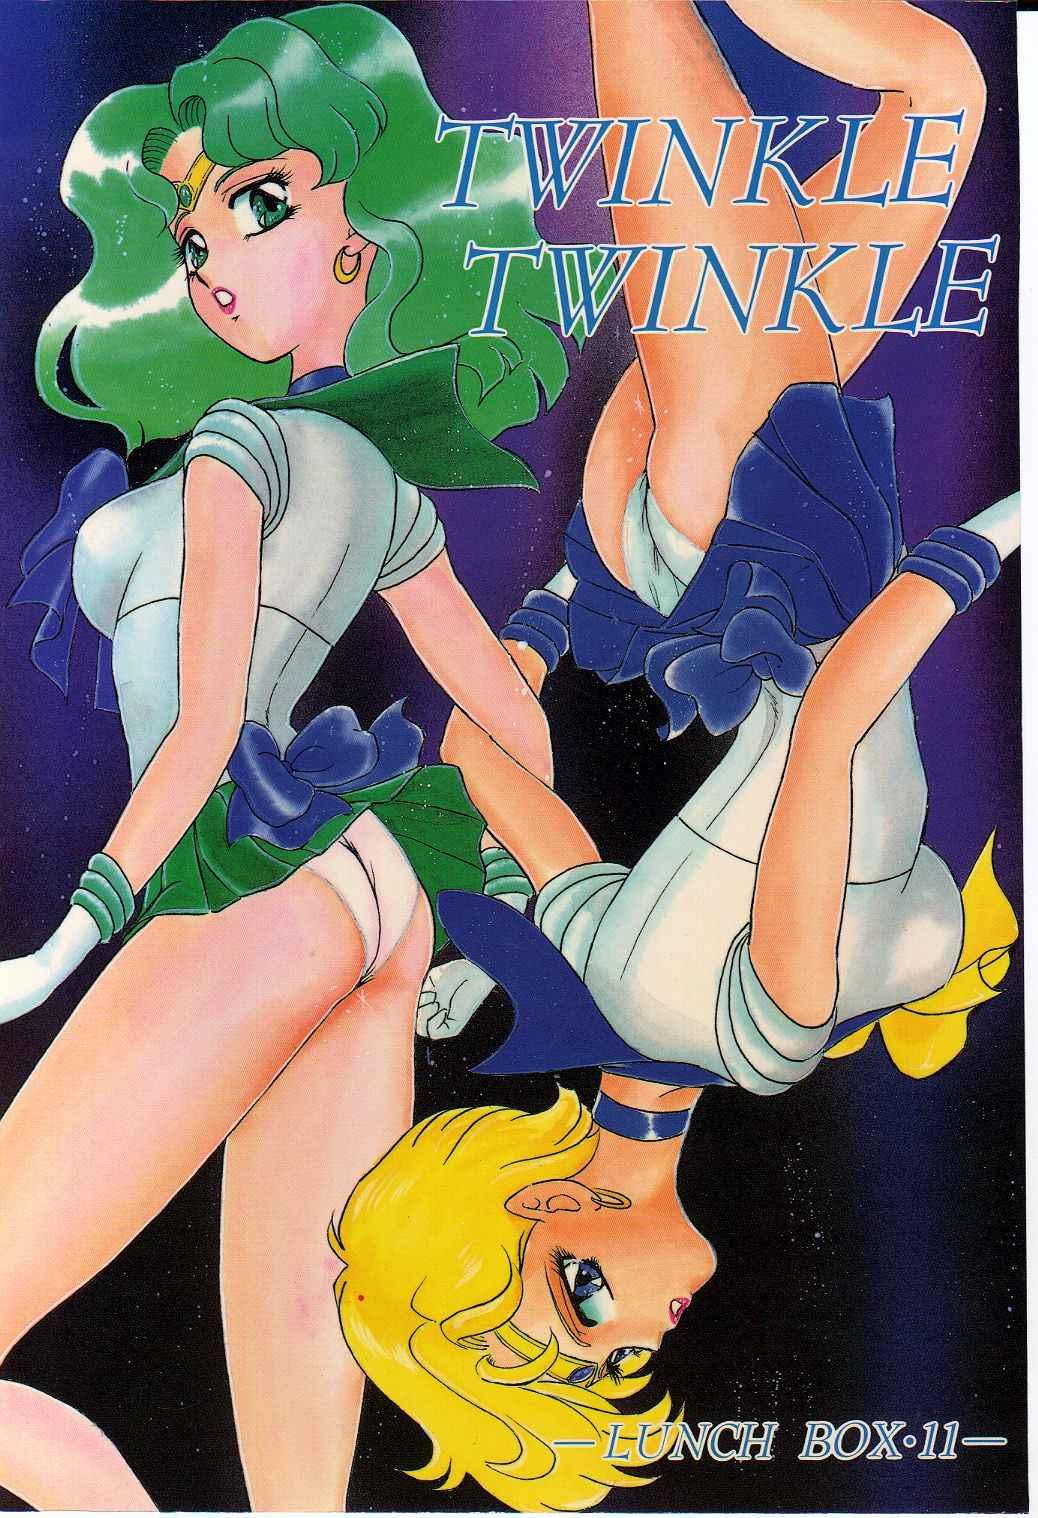 Free Hard Core Porn Lunch Box 11 - Twinkle Twinkle - Sailor moon Anus - Picture 1